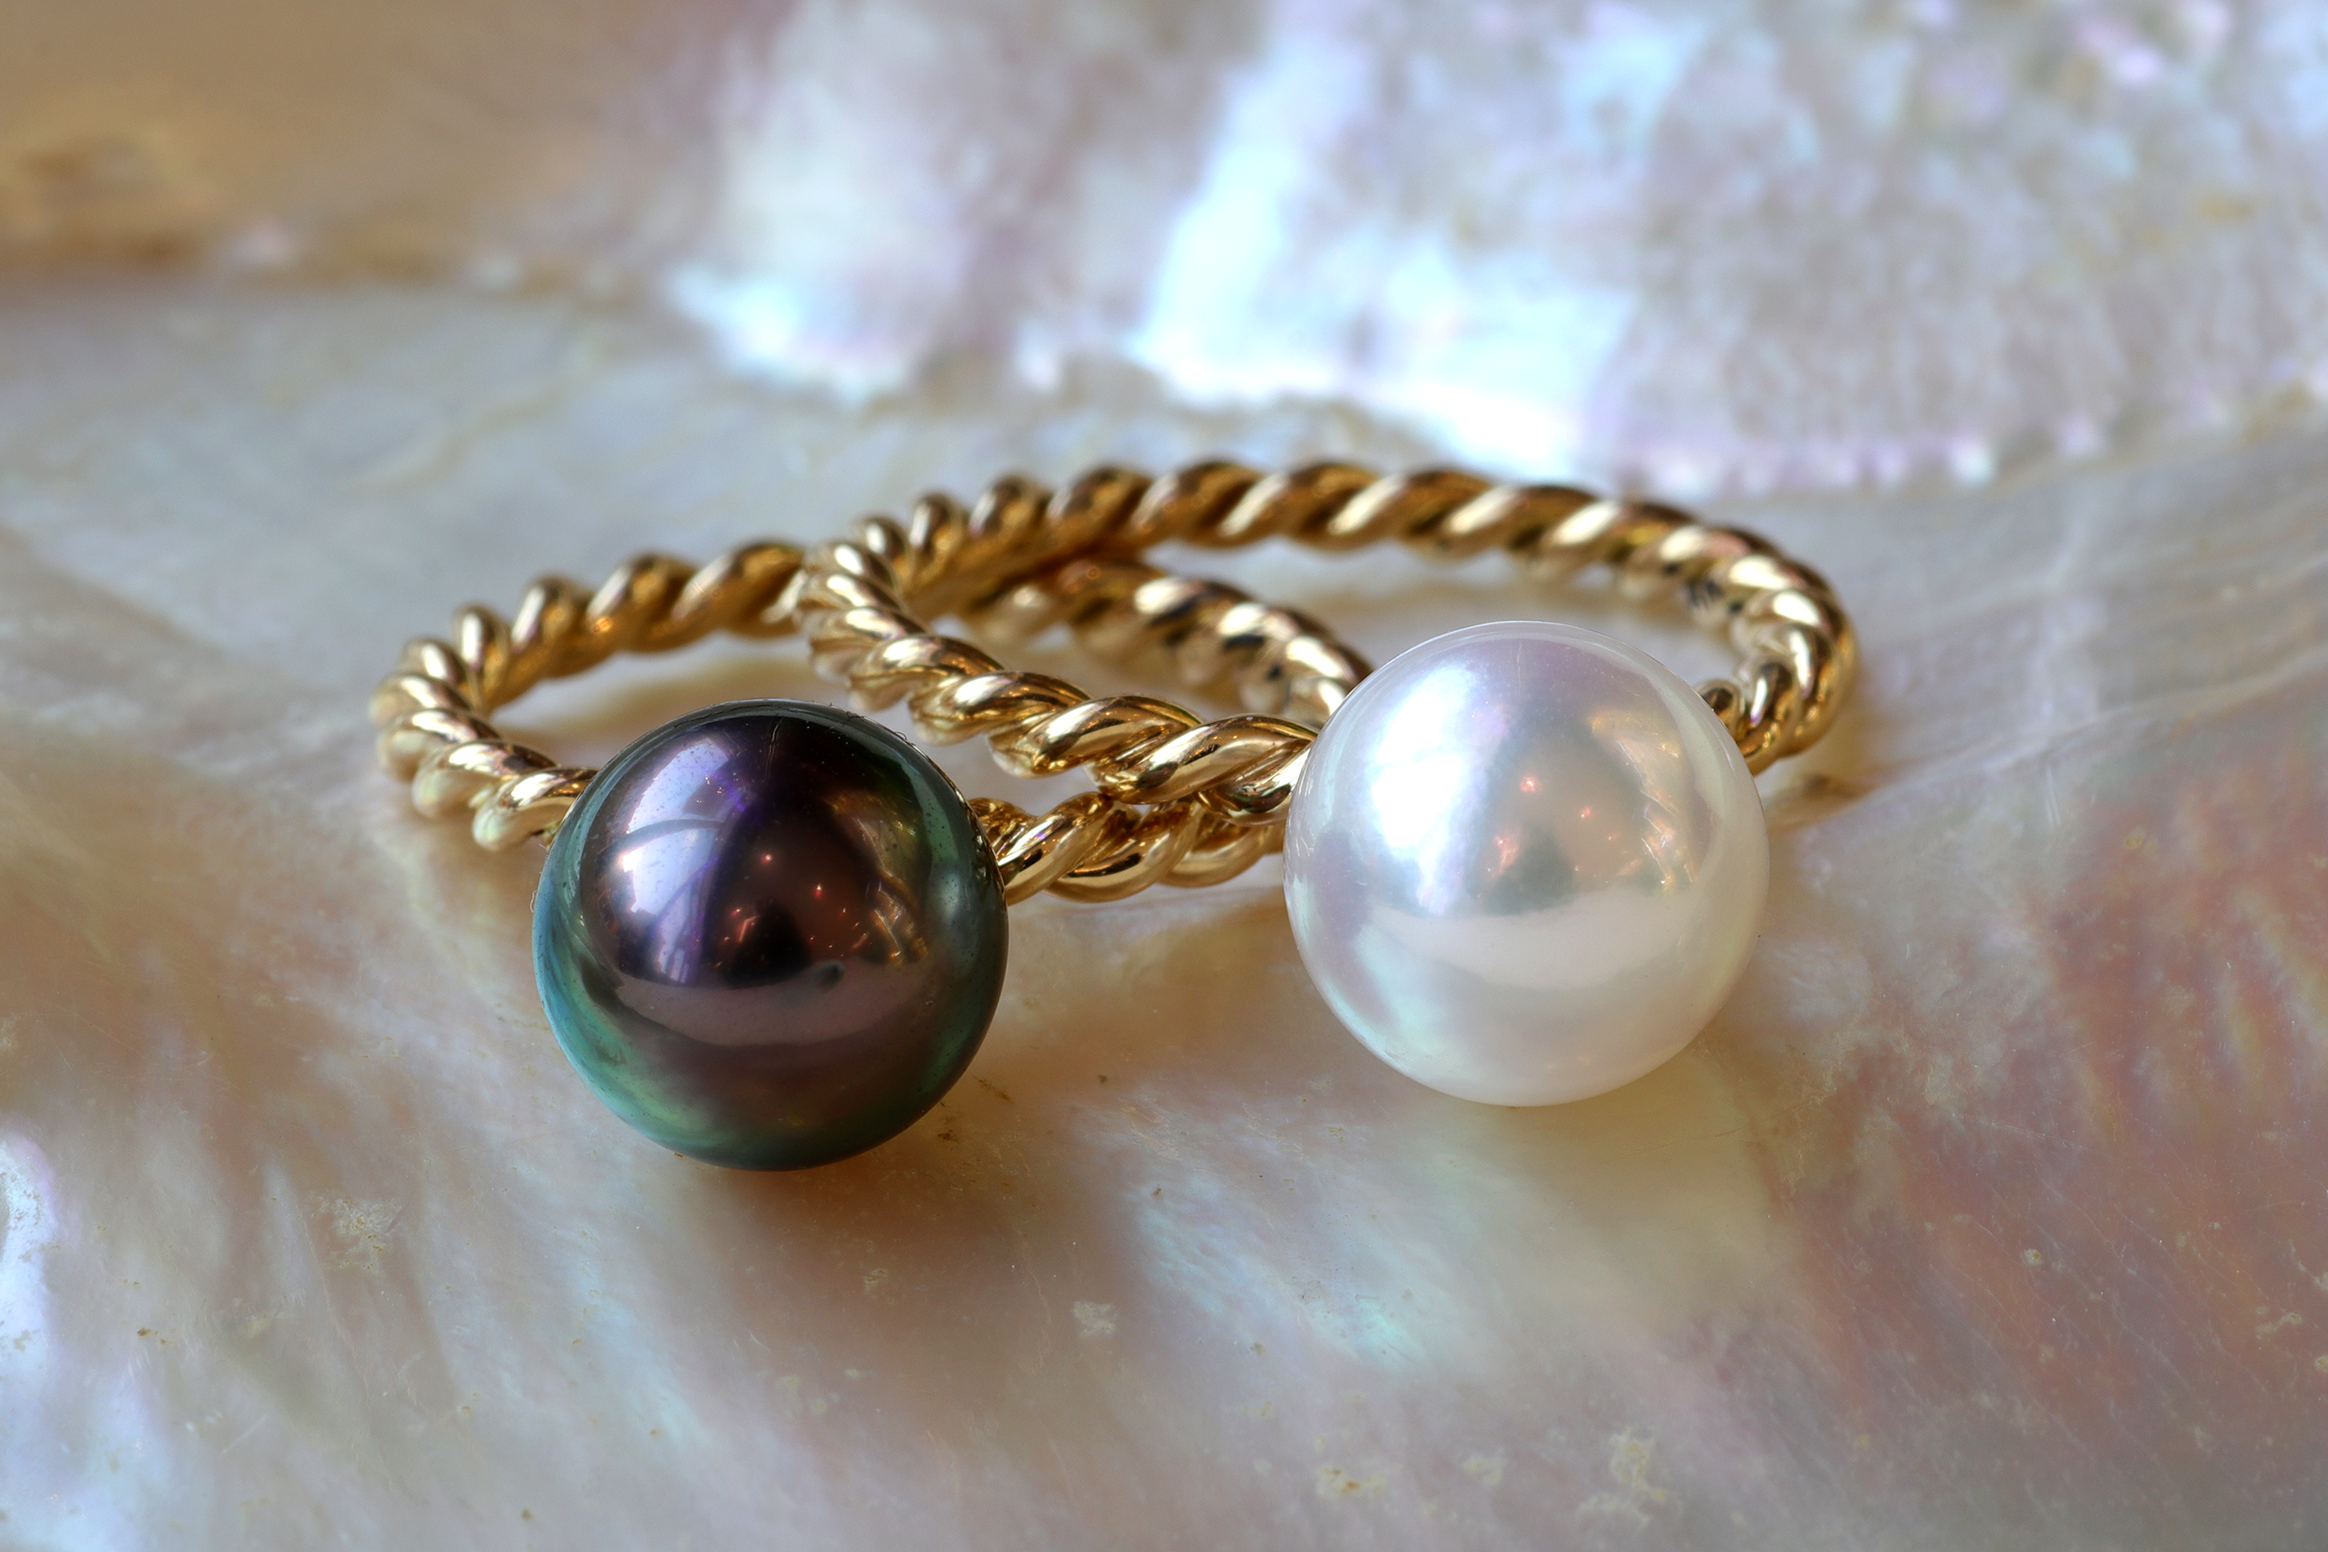 Twisted Band Akoya Pearl Ring By Bree Altman